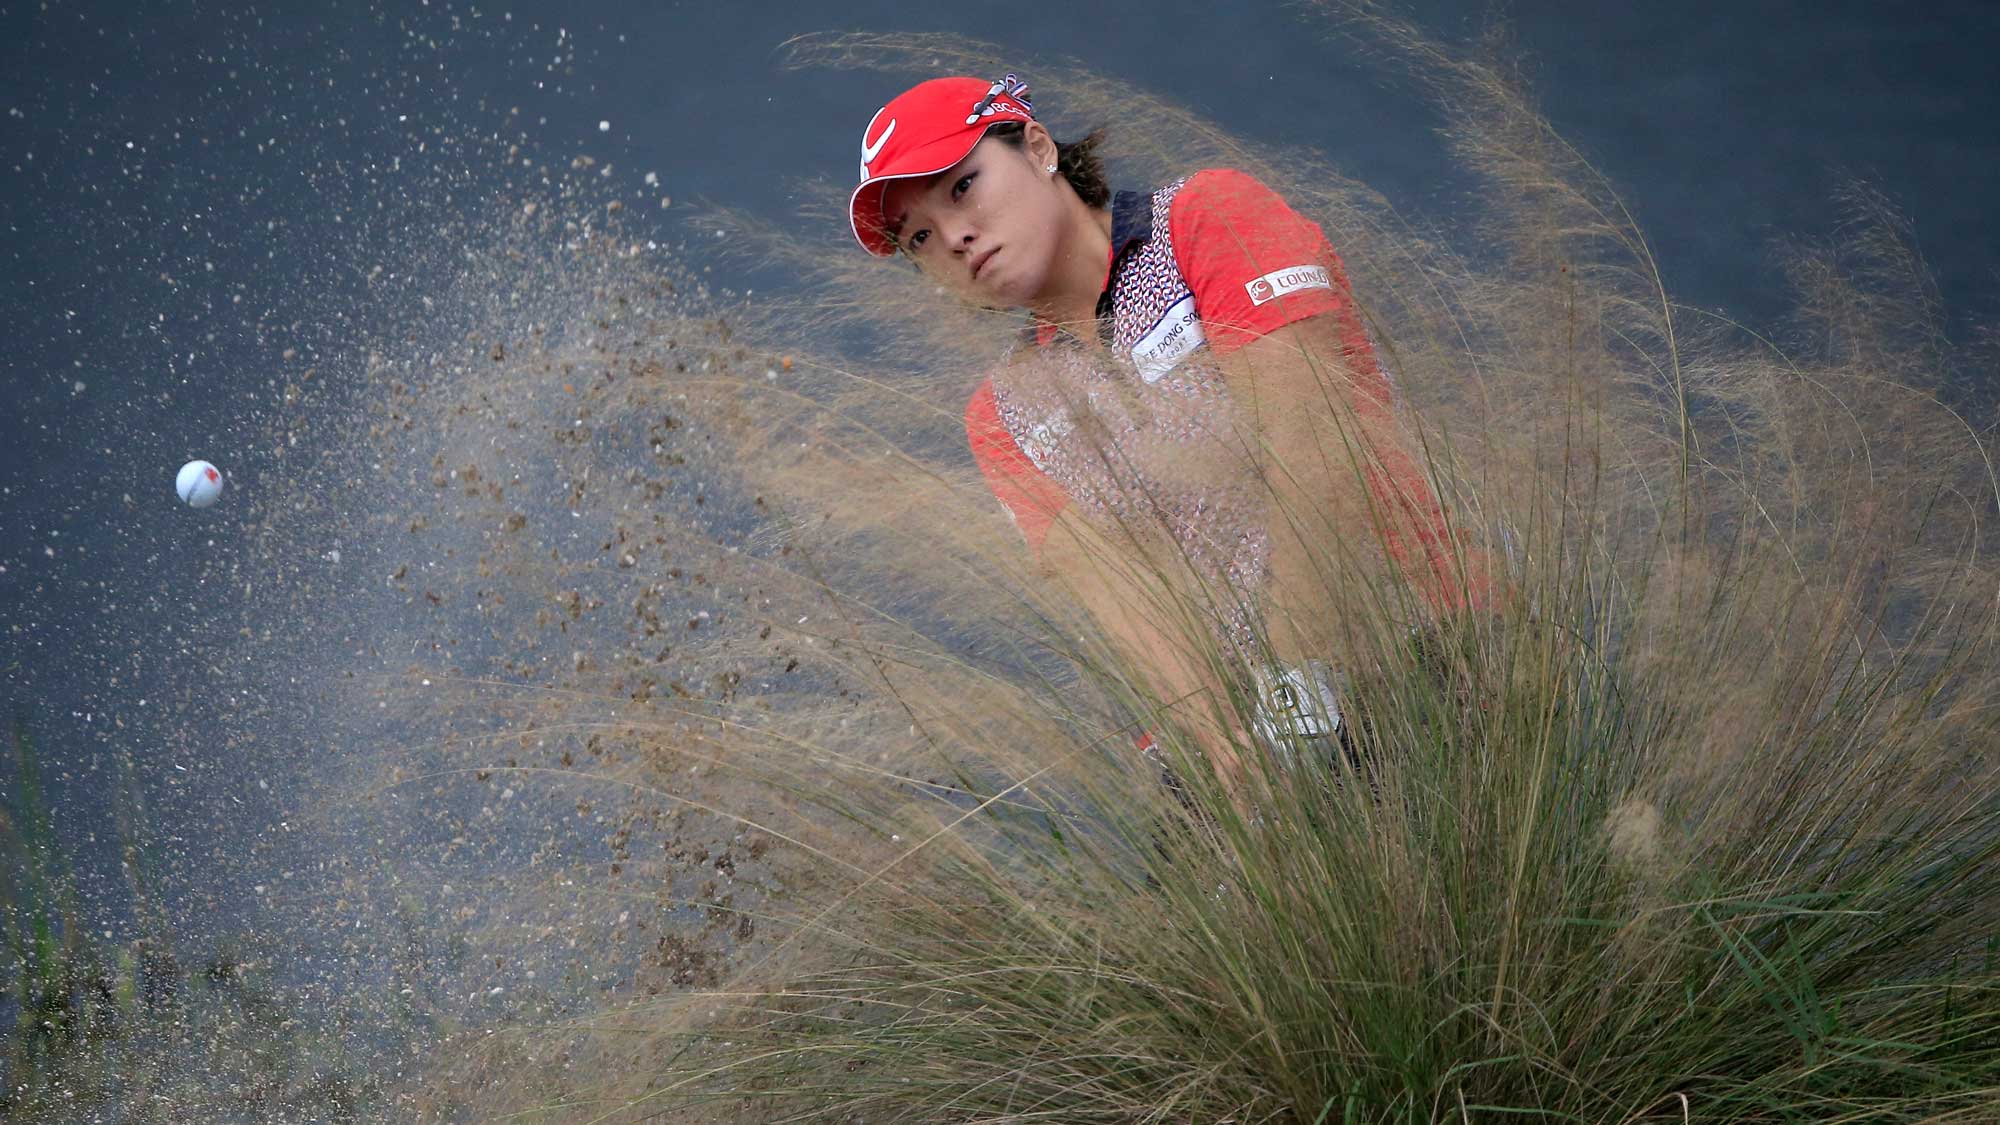 Ha Na Jang of South Korea plays a shot on the 18th hole during the third round of the CME Group Tour Championship at Tiburon Golf Club